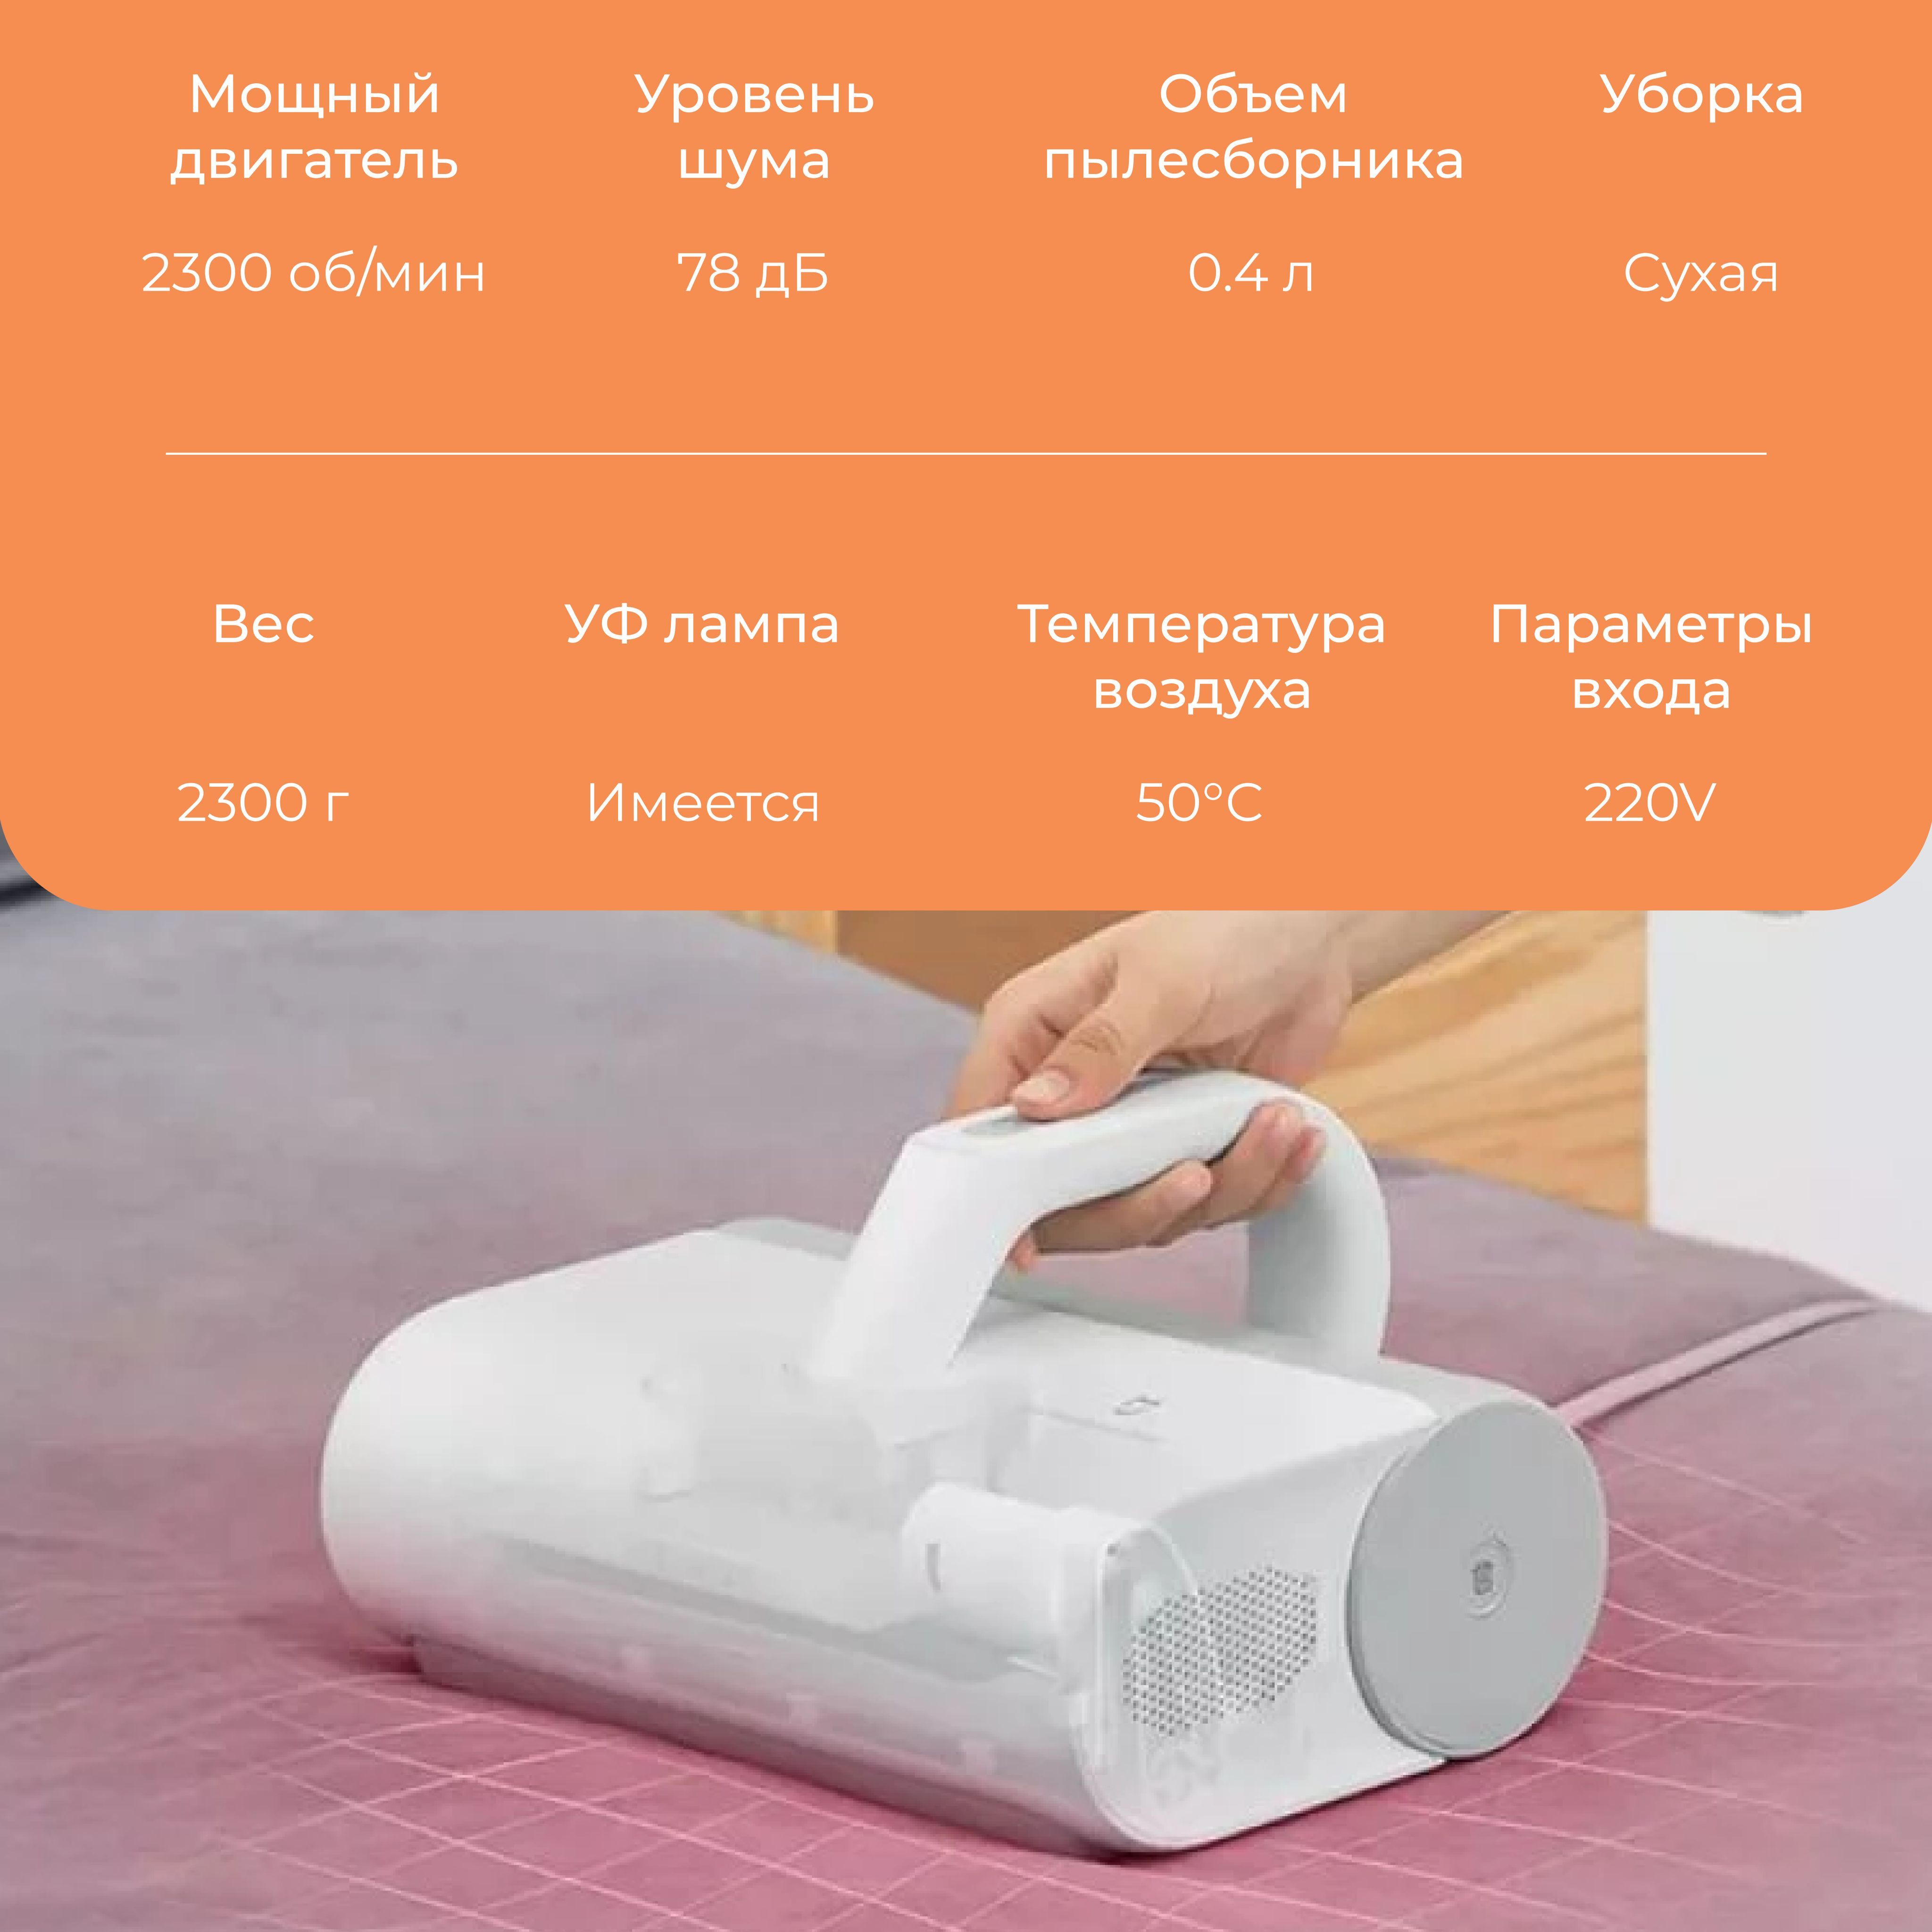 Mijia dust mite vacuum cleaner mjcmy01dy. Пылесос Xiaomi (mjcmy01dy). Xiaomi Dust Mite Vacuum. Xiaomi Dust Mite Vacuum вилка. Xiaomi Mijia Dust Mite Vacuum Cleaner.